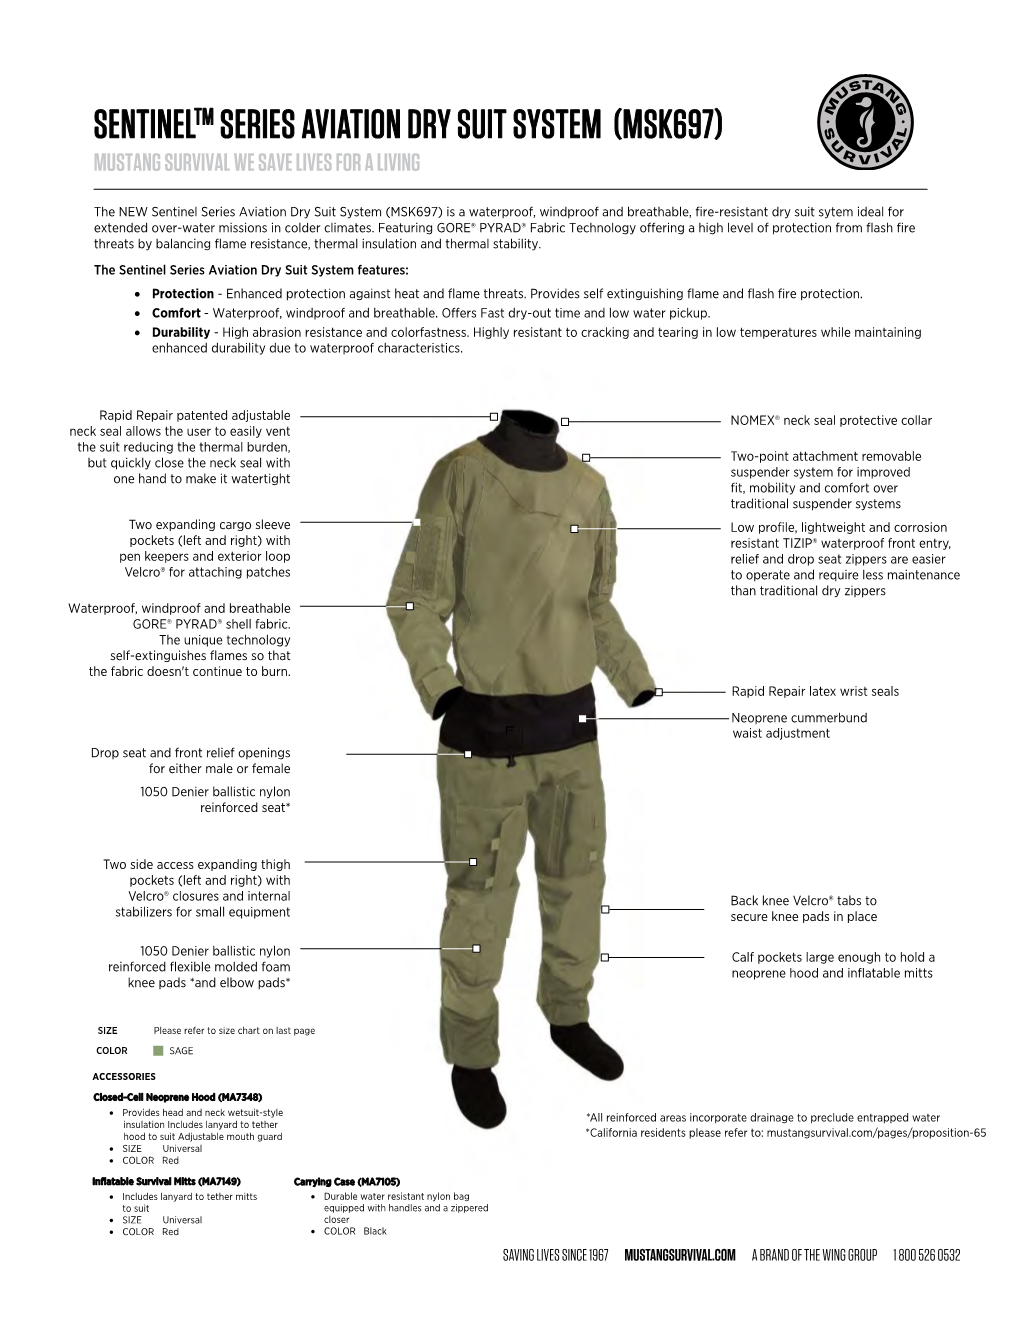 Sentineltm Series Aviation Dry Suit System (Msk697) Mustang Survival We Save Lives for a Living